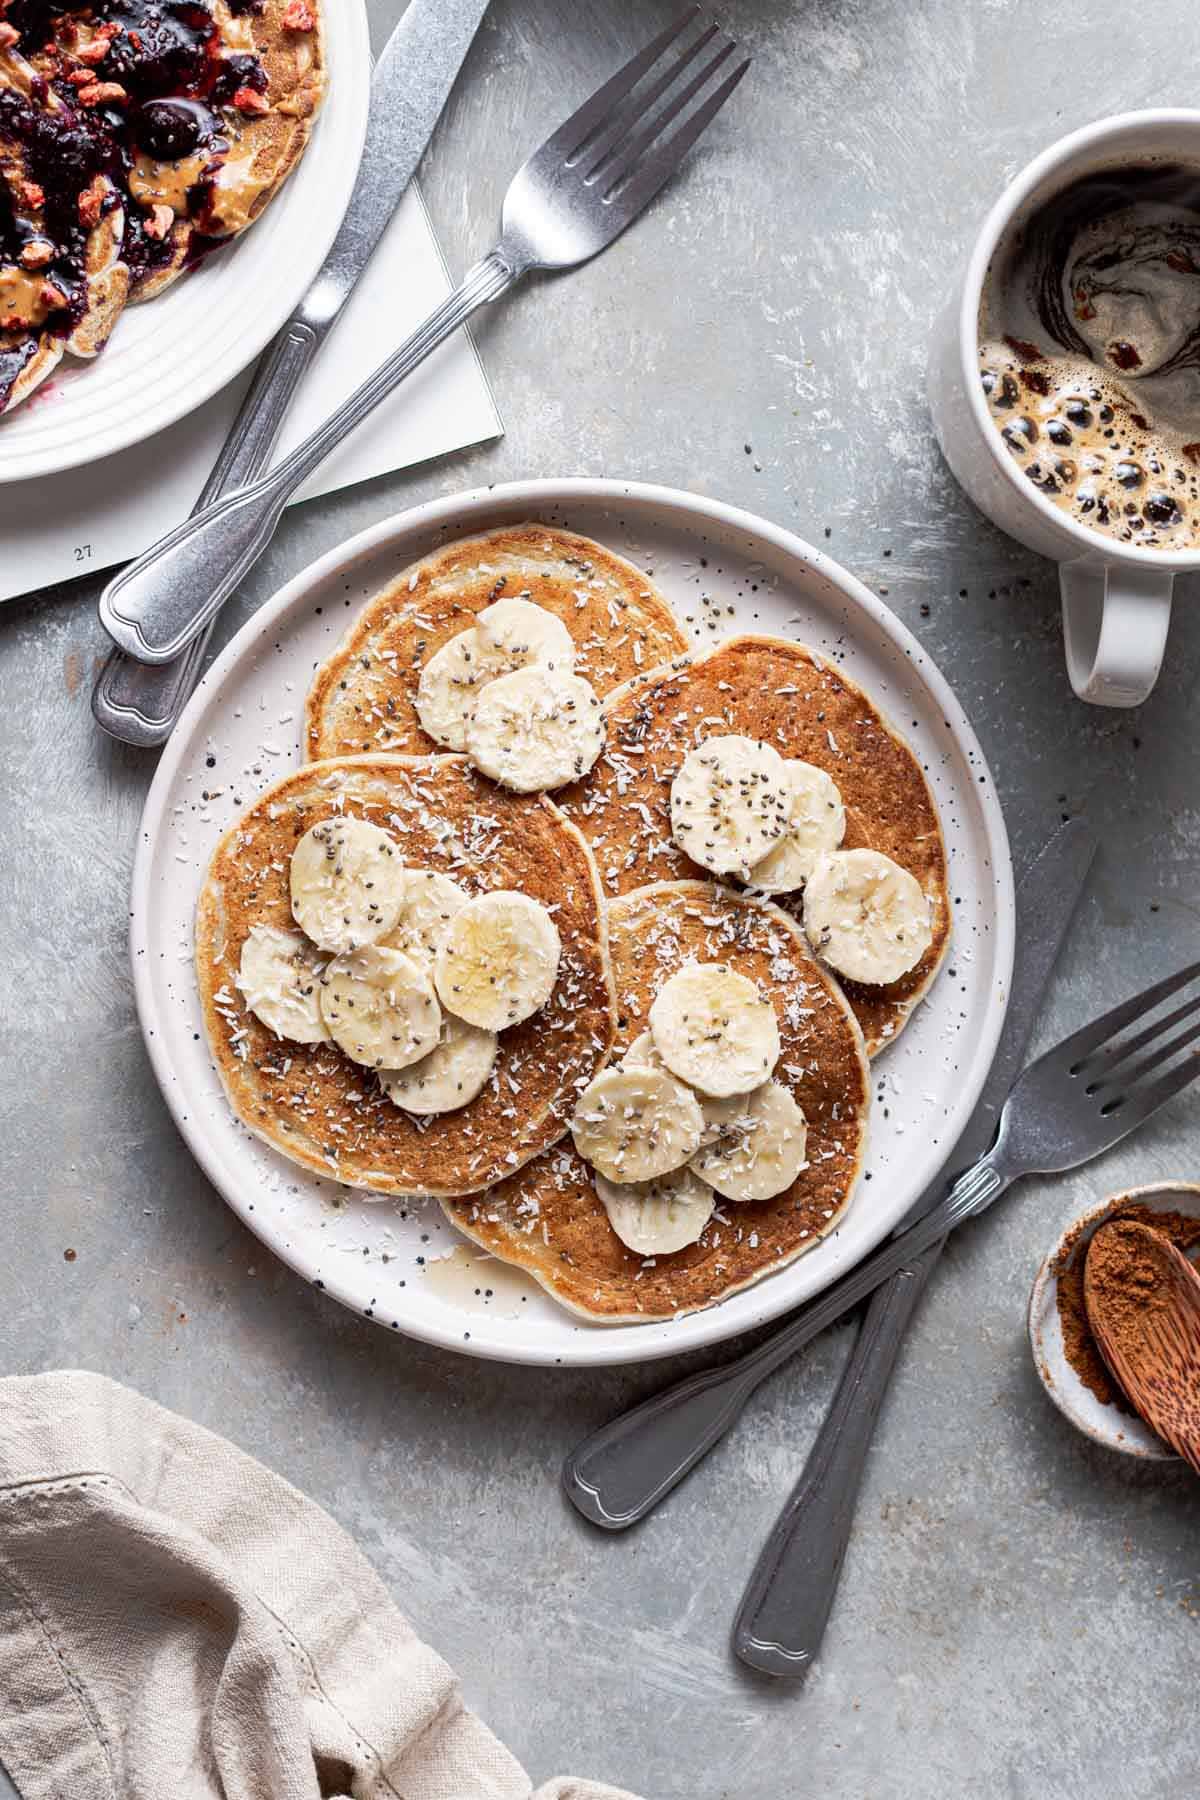 Four vegan pancakes on a plate topped off with banana.